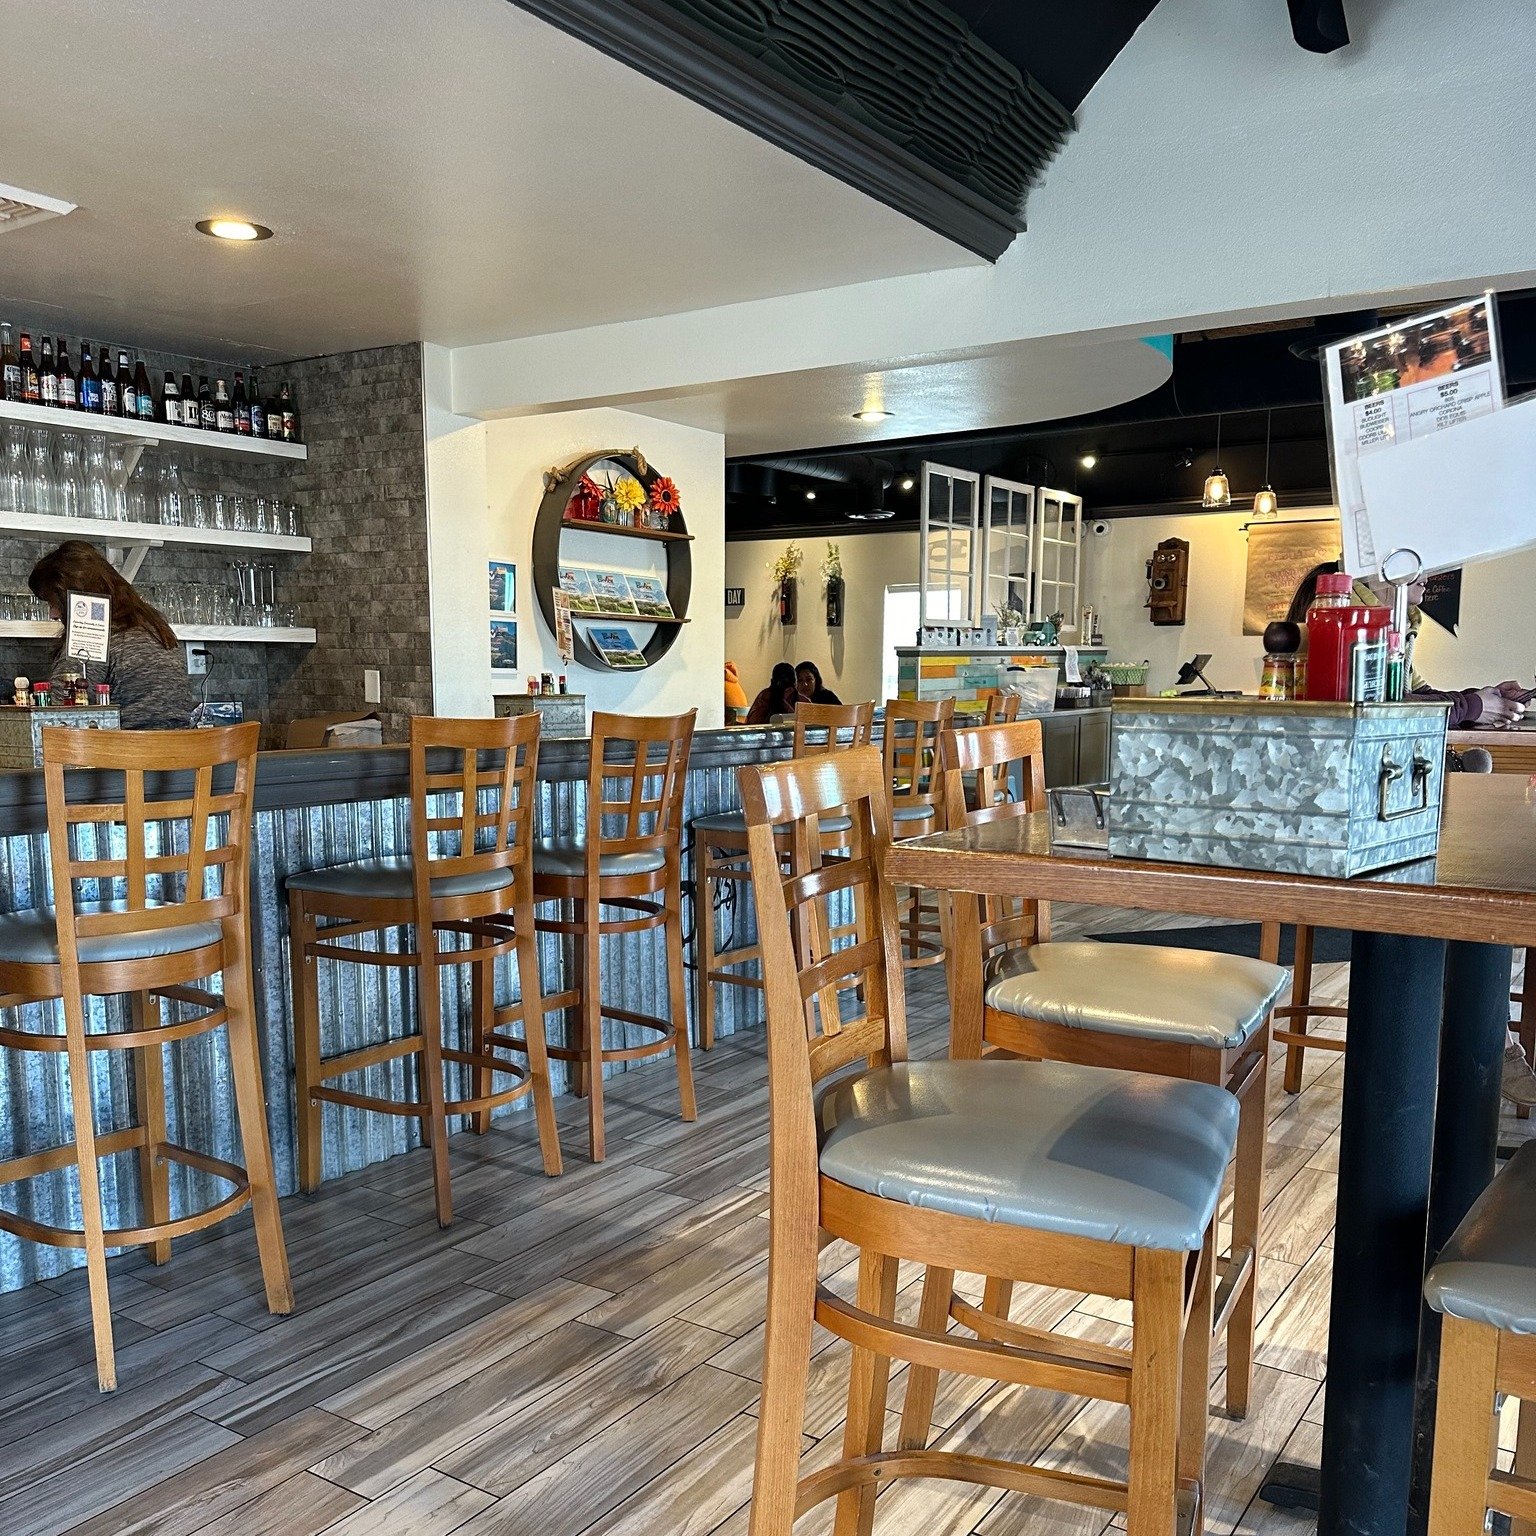 🌟 Gather round our welcoming bar area at Dreez! It's the ideal spot for family and friends to enjoy a refreshing drink and share laughs. 🍸

🕗 7am &ndash; 2pm

#localrestaurant #dreezrestaurant #homemeansnevada #lunchbreak #eatlocal #elkonevada